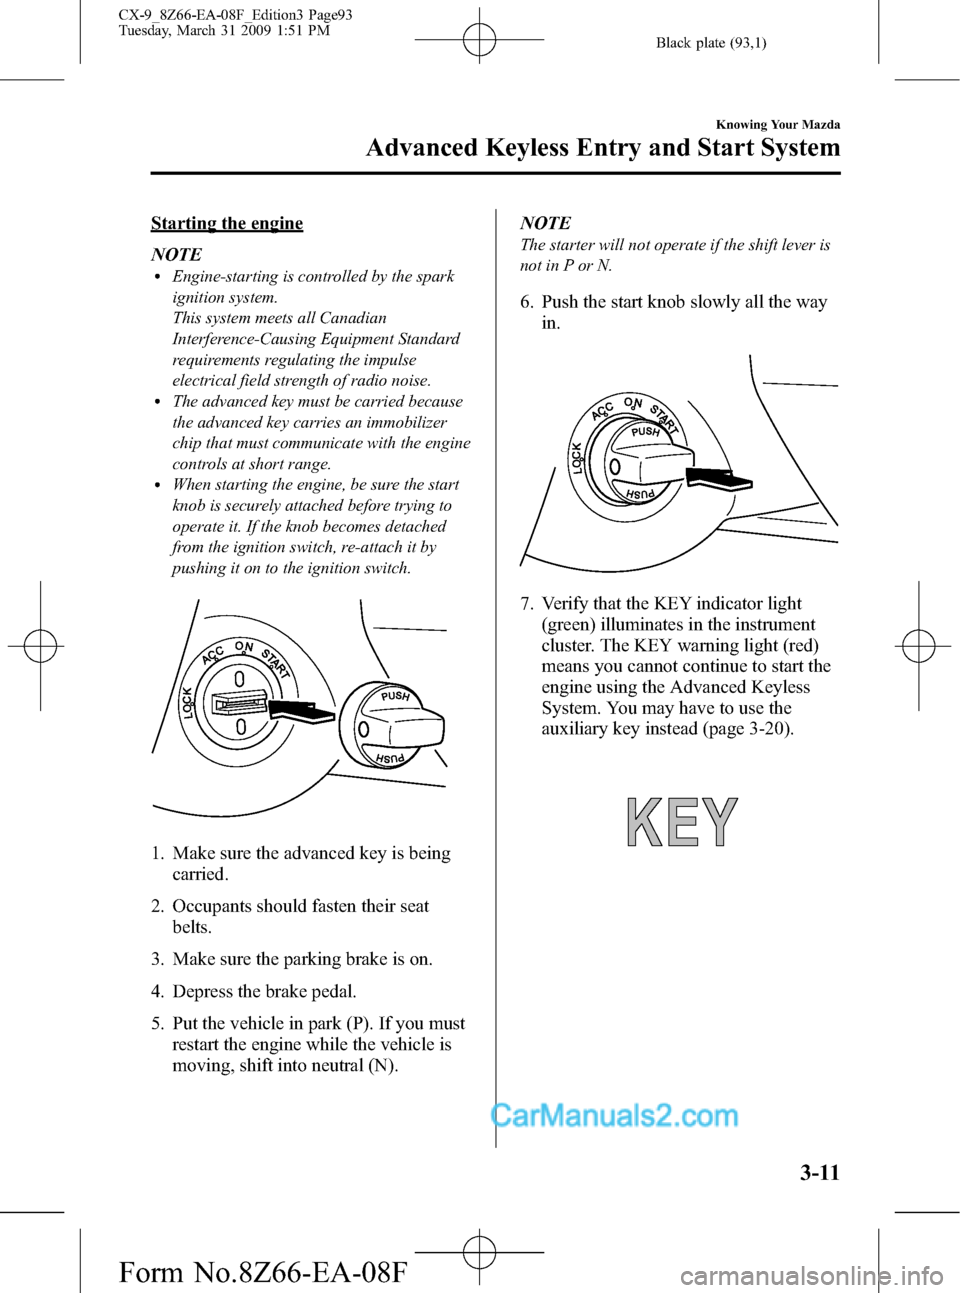 MAZDA MODEL CX-9 2009  Owners Manual (in English) Black plate (93,1)
Starting the engine
NOTE
lEngine-starting is controlled by the spark
ignition system.
This system meets all Canadian
Interference-Causing Equipment Standard
requirements regulating 